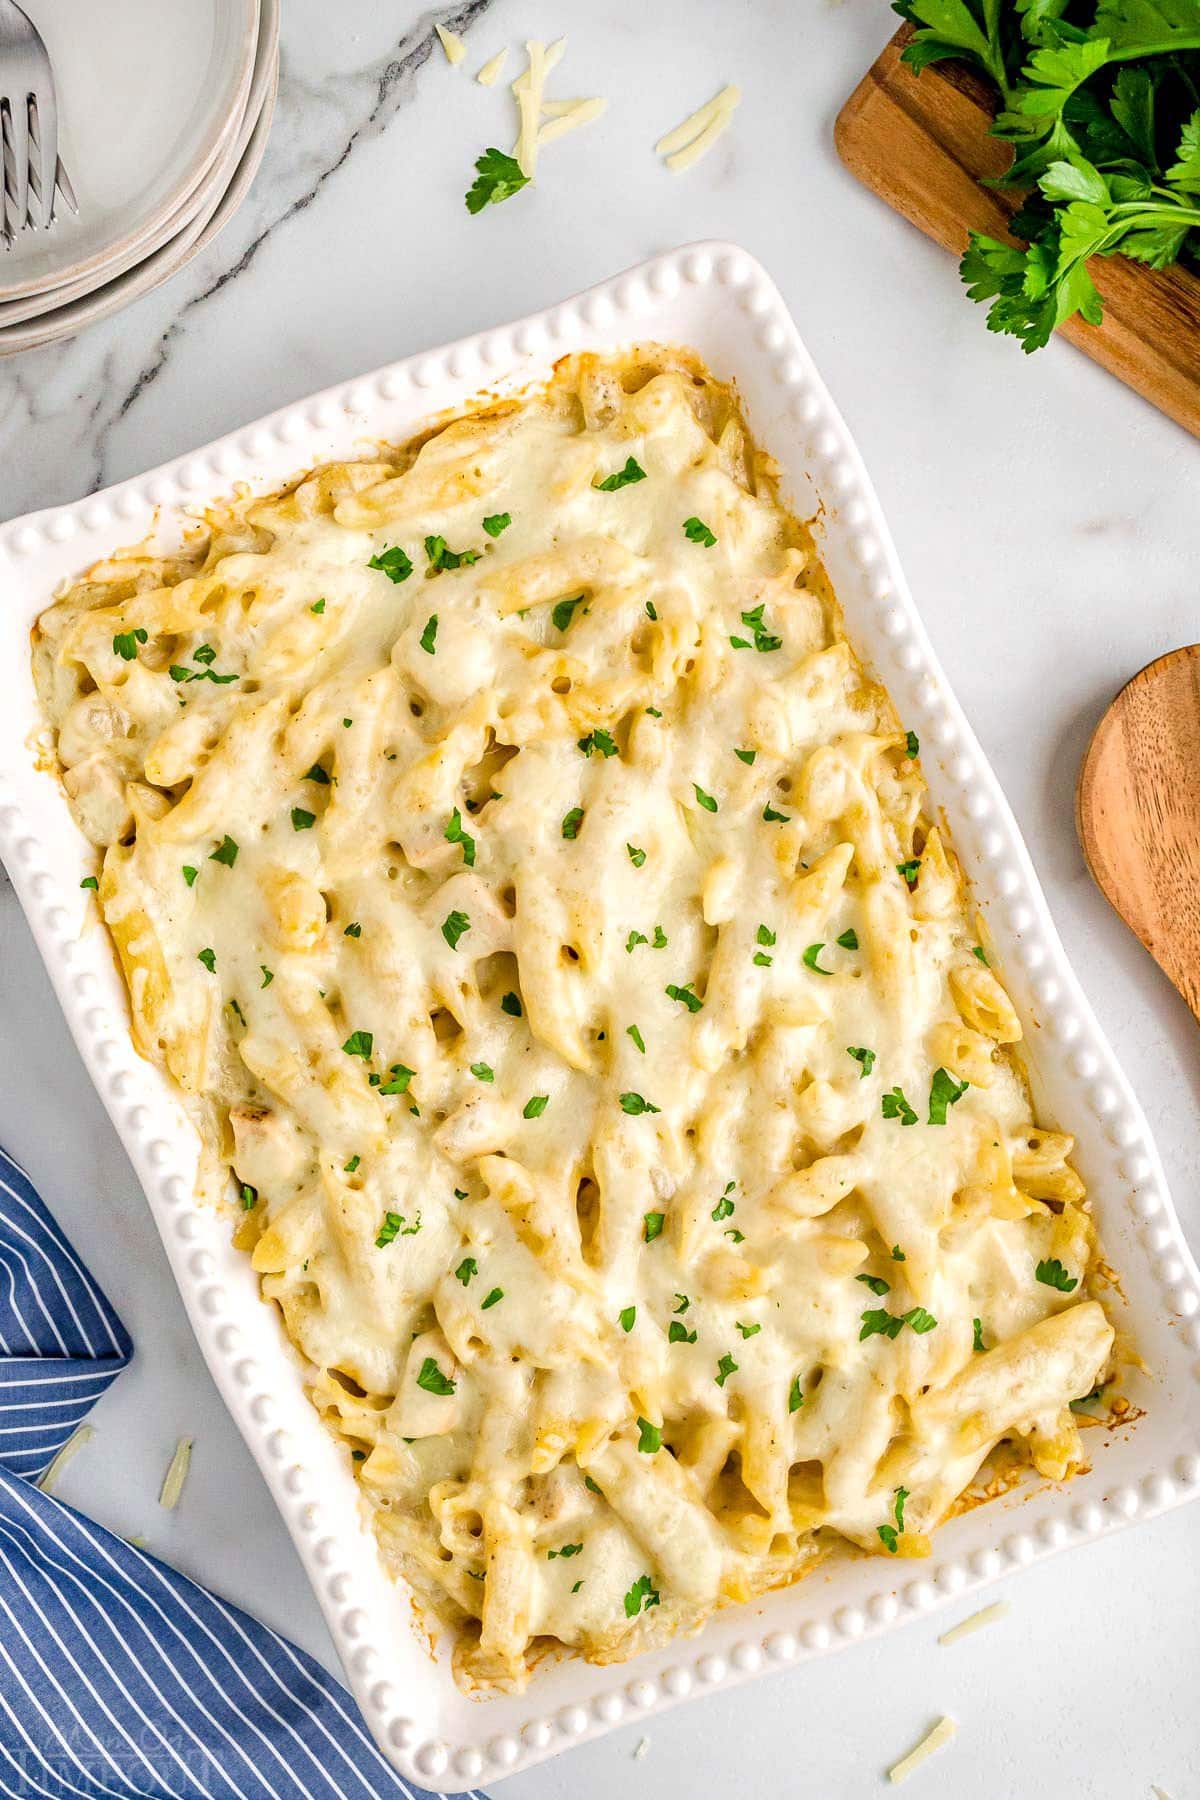 top down look at chicken alfredo bake in a white casserole dish garnished with fresh parsley and blue and white striped napkin in the bottom left corner.